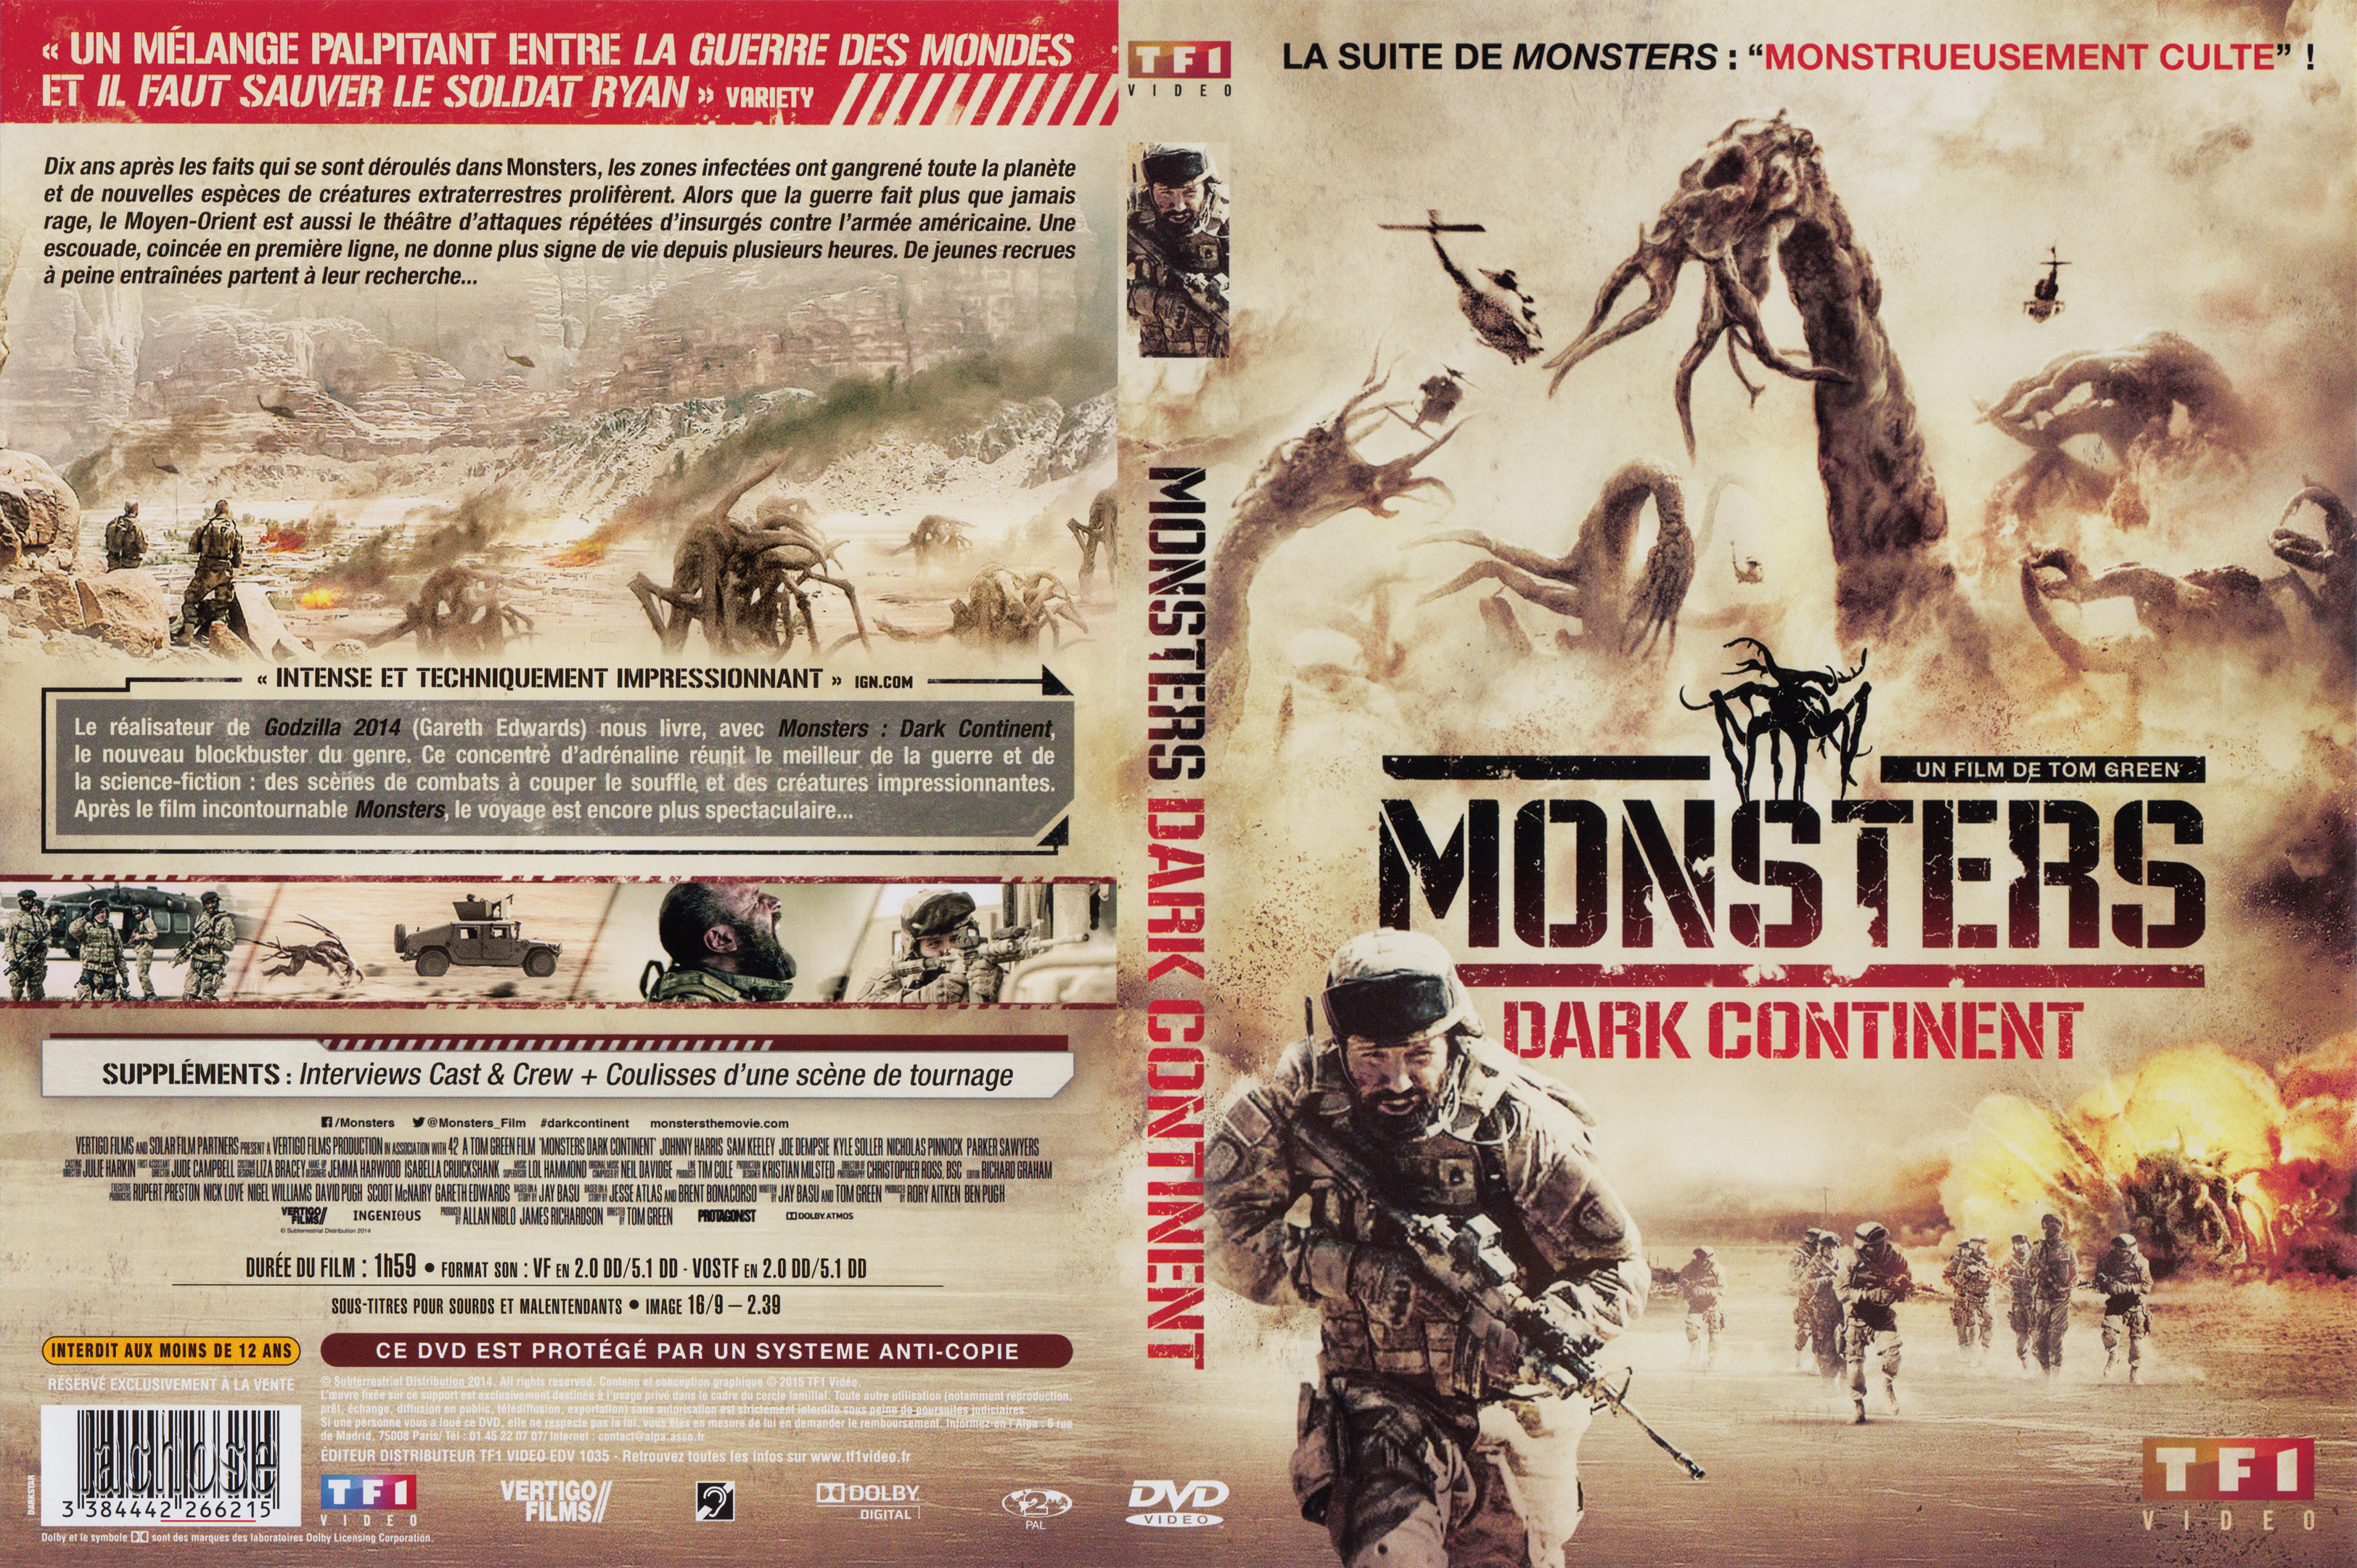 Jaquette DVD Monsters: Dark Continent